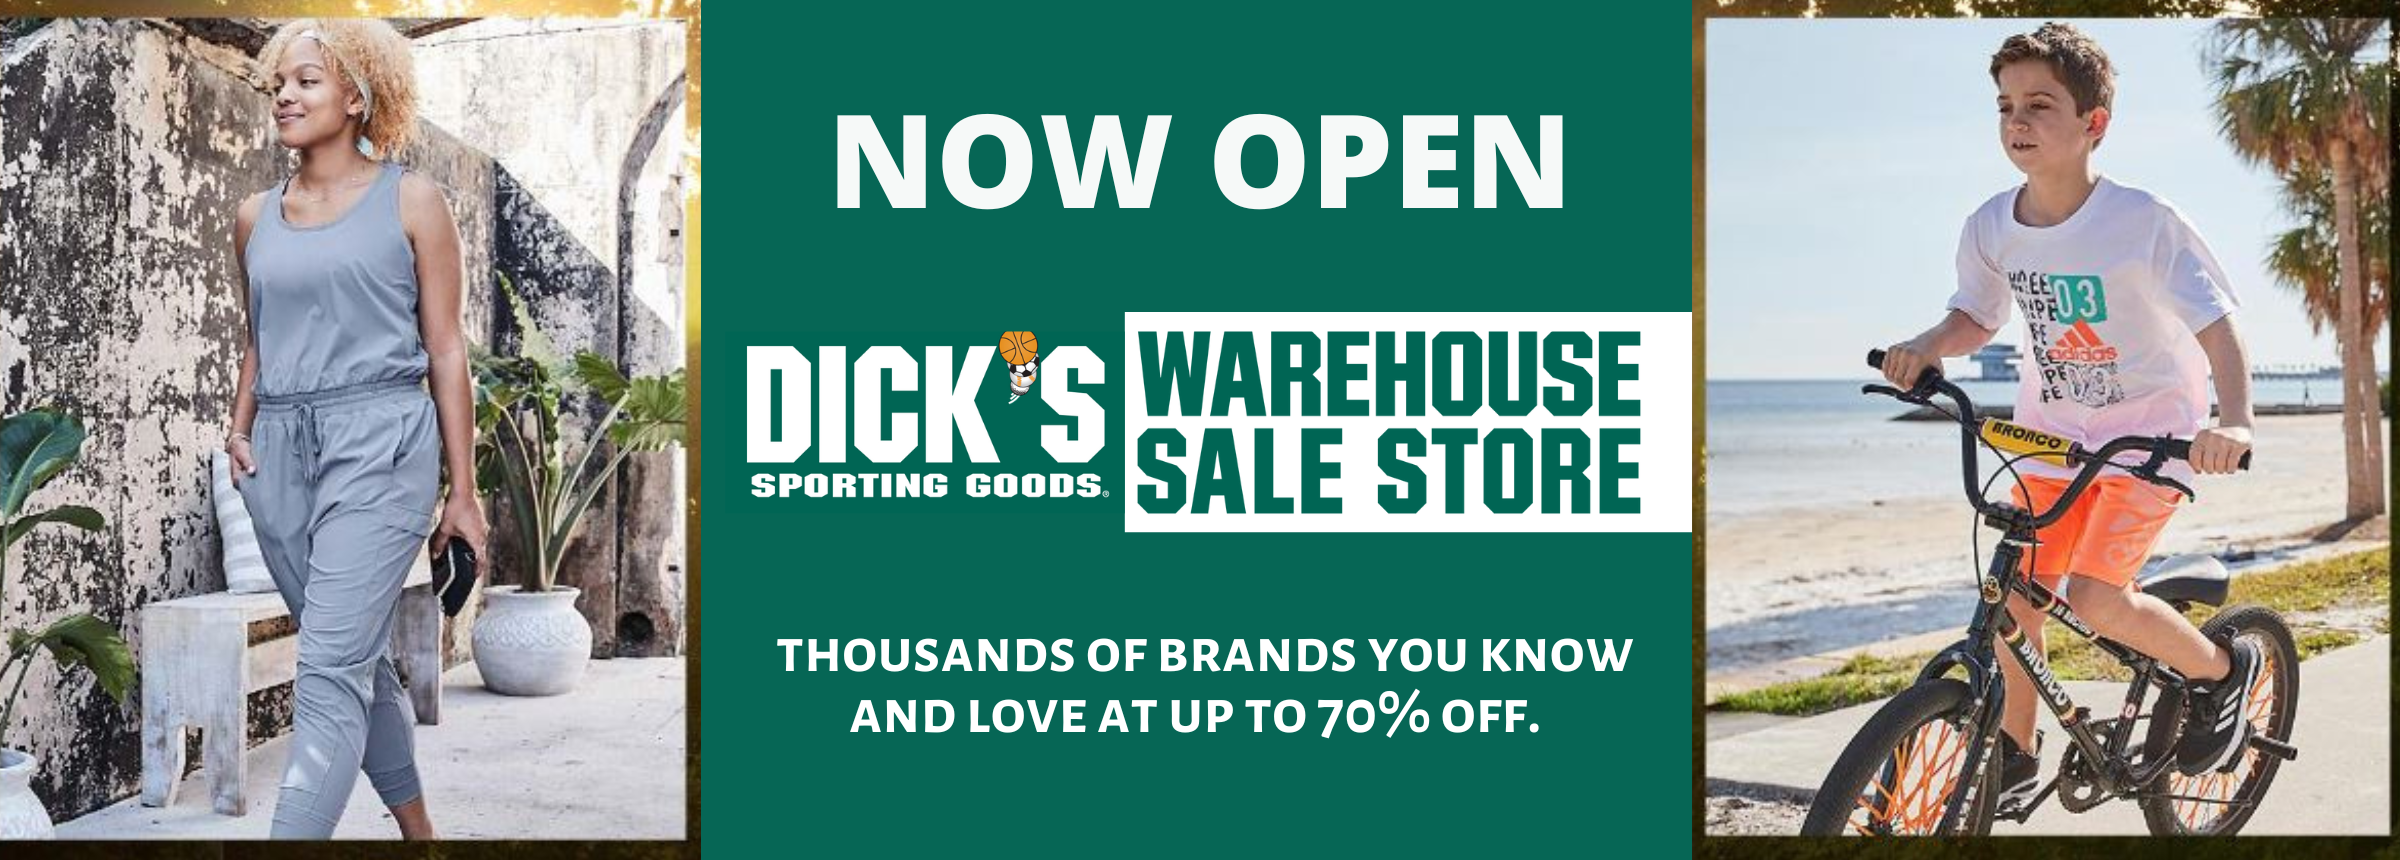 Dick's Warehouse Sale Store Banner Image (1)